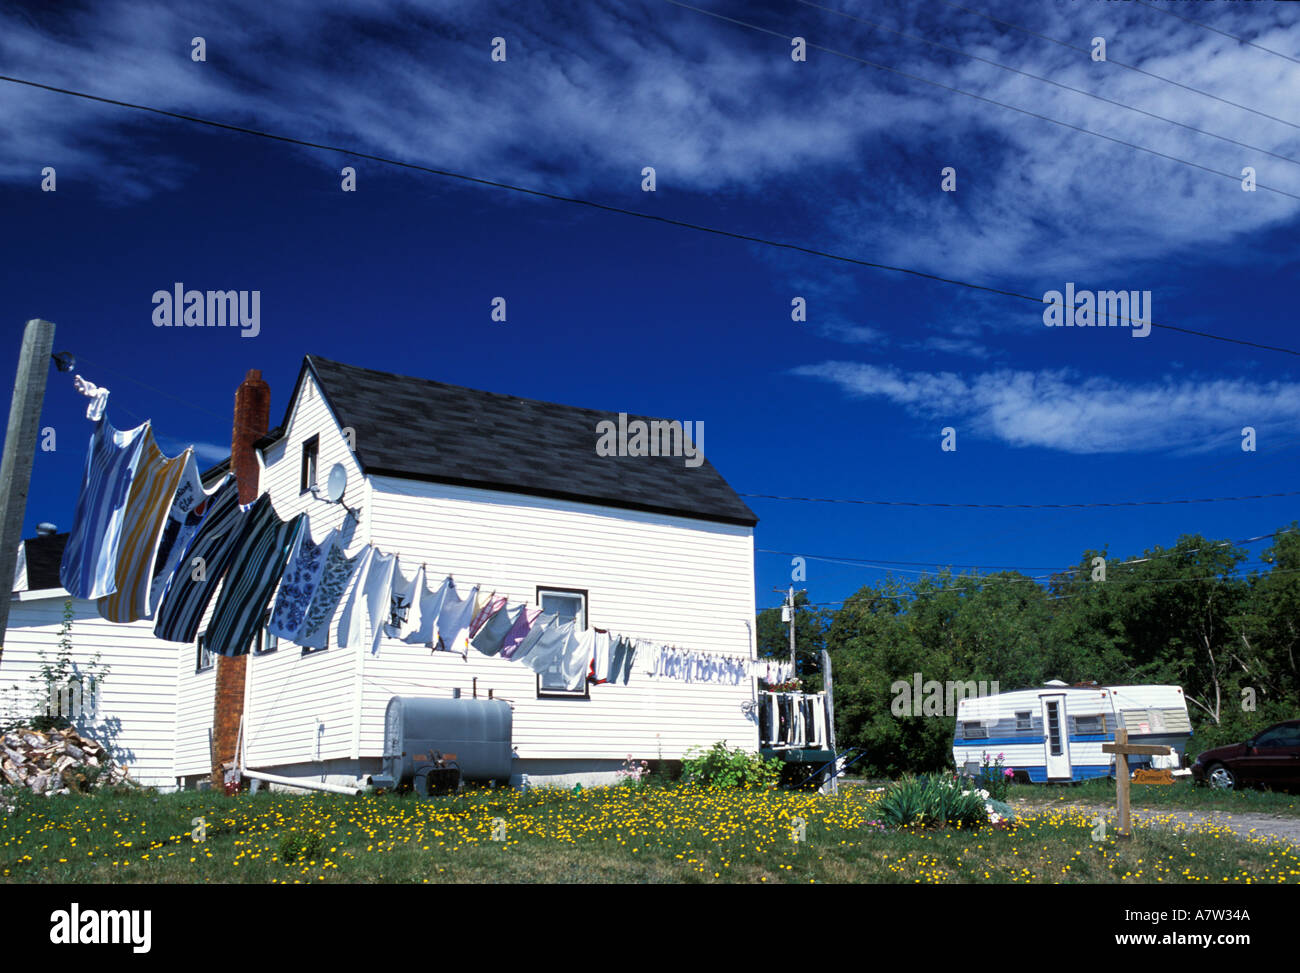 Laundry swinging in the breeze in front of a white clapboard house with trailer caravan in Bouctouche New Brunswick Canada Stock Photo